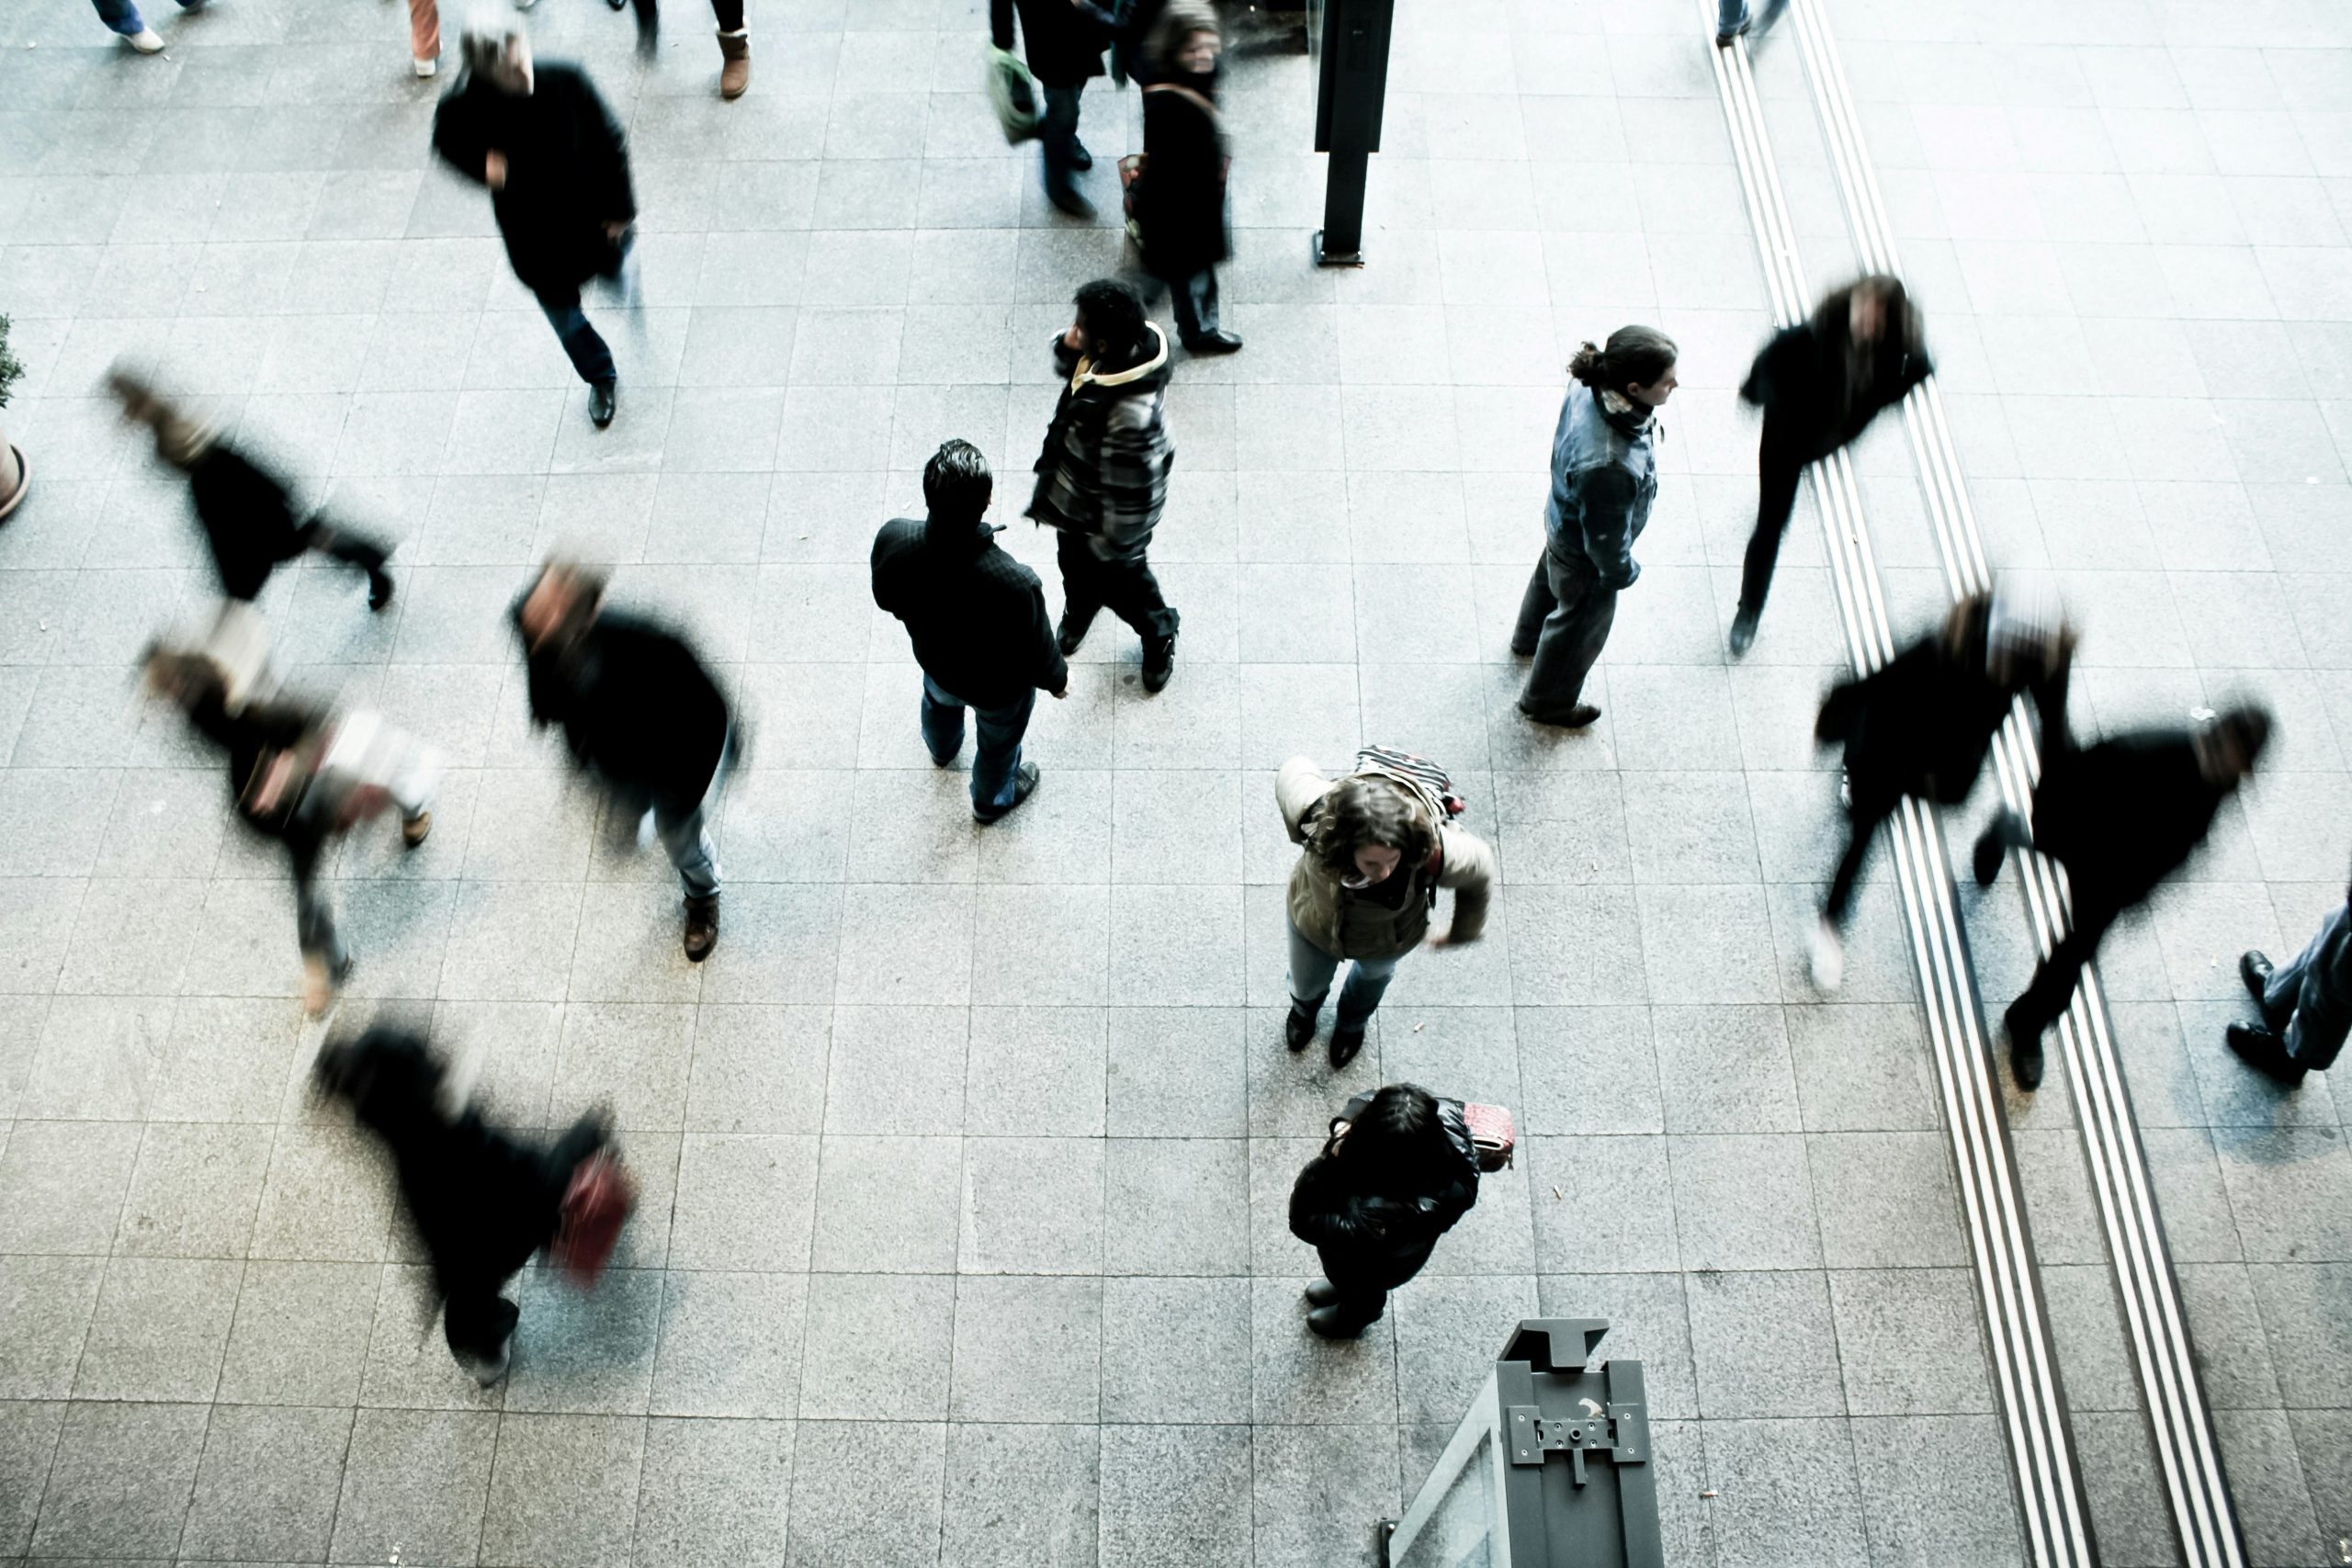 A photograph taken from an aerial view of blurry people walking in various directions. The ground is composed of gray stones.